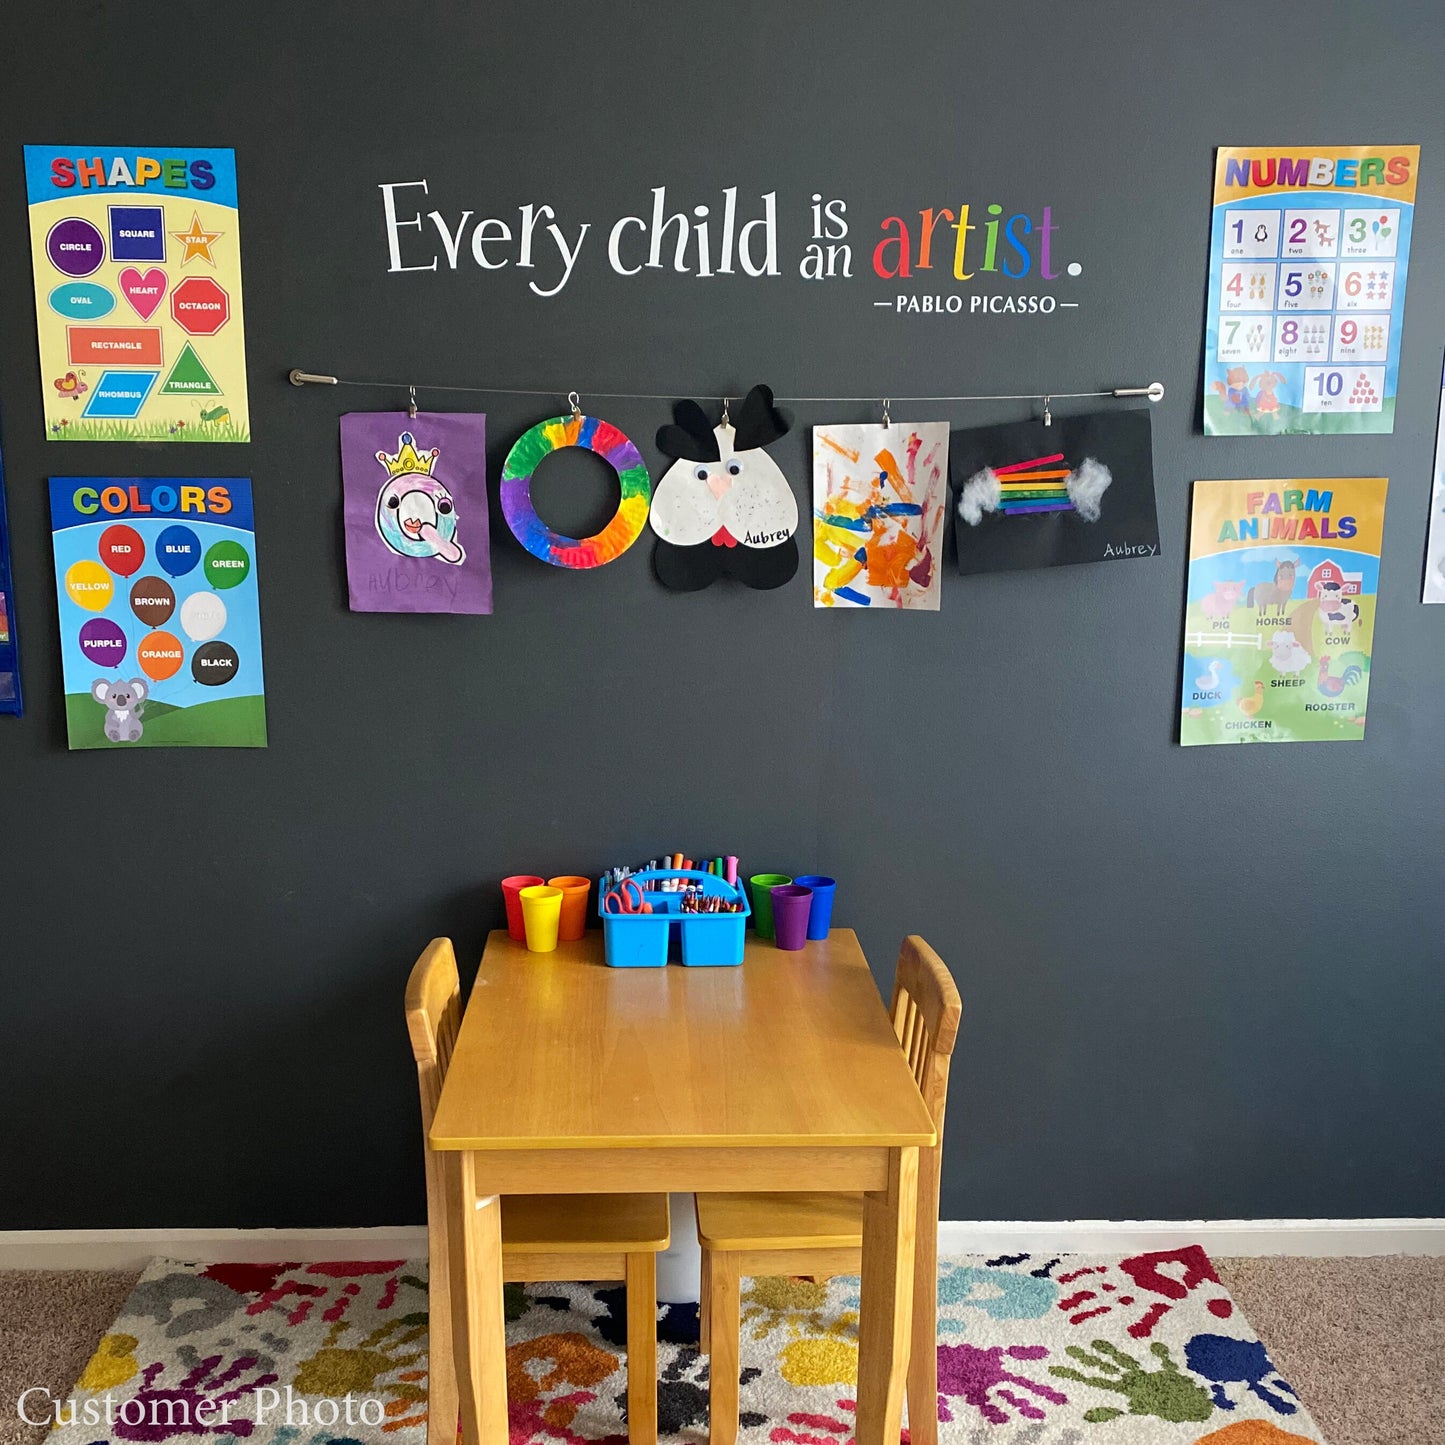 Every Child is an Artist Decal | Children Artwork Display Decal | Picasso Quote Wall Sticker | Printed Wall Decal